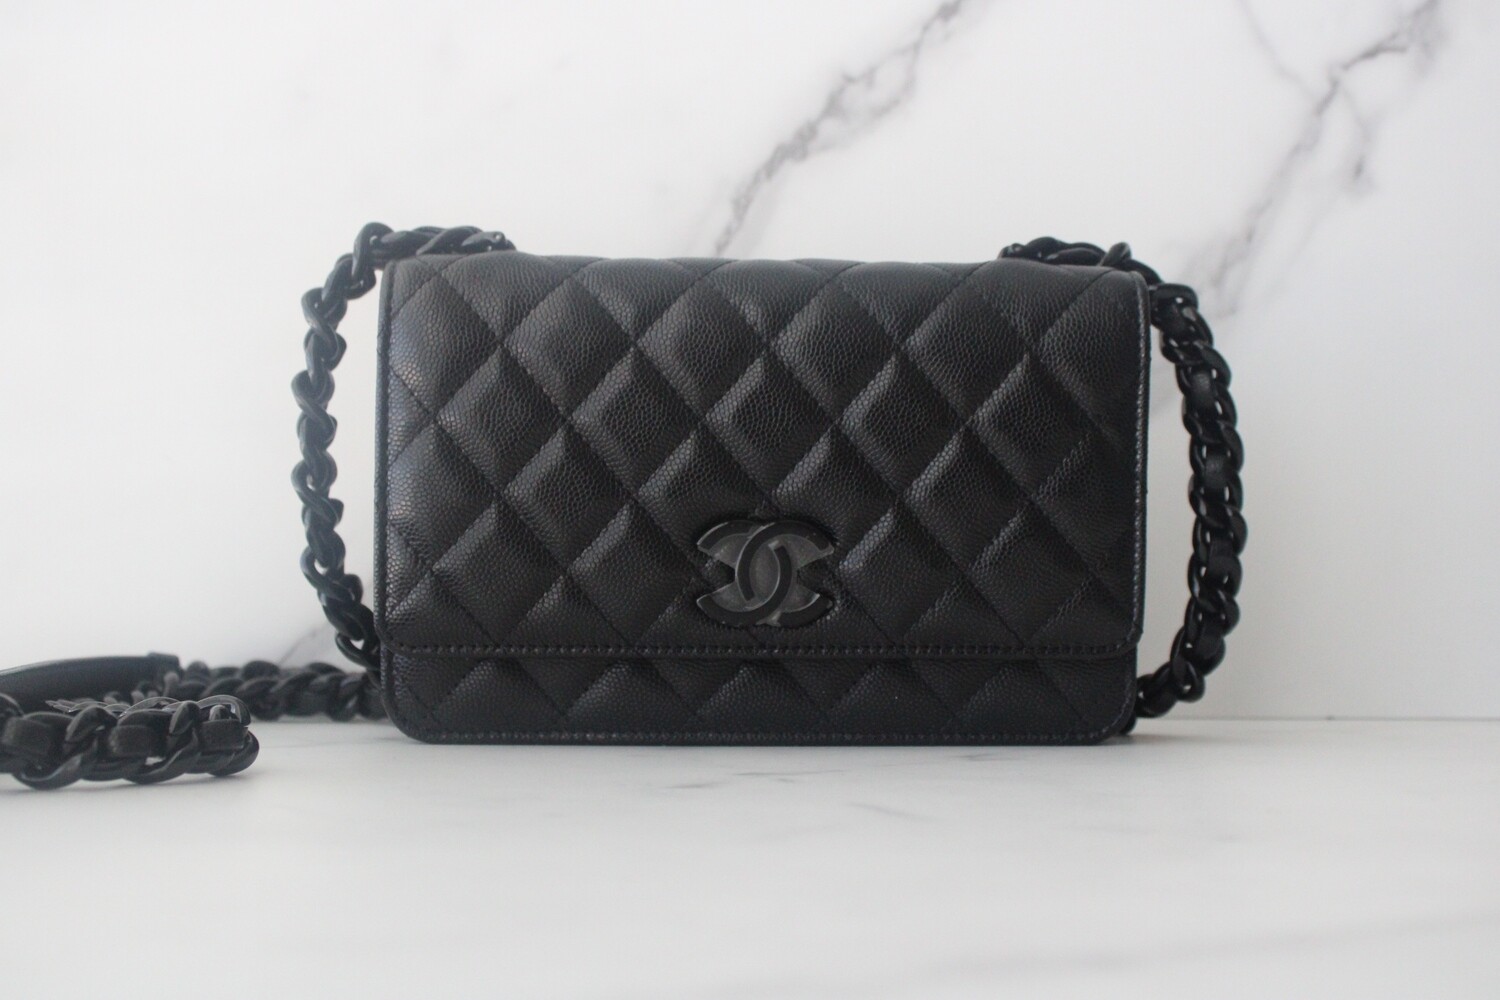 Chanel Wallet on Chain, Black Caviar Leather, So Black Hardware, New in Box